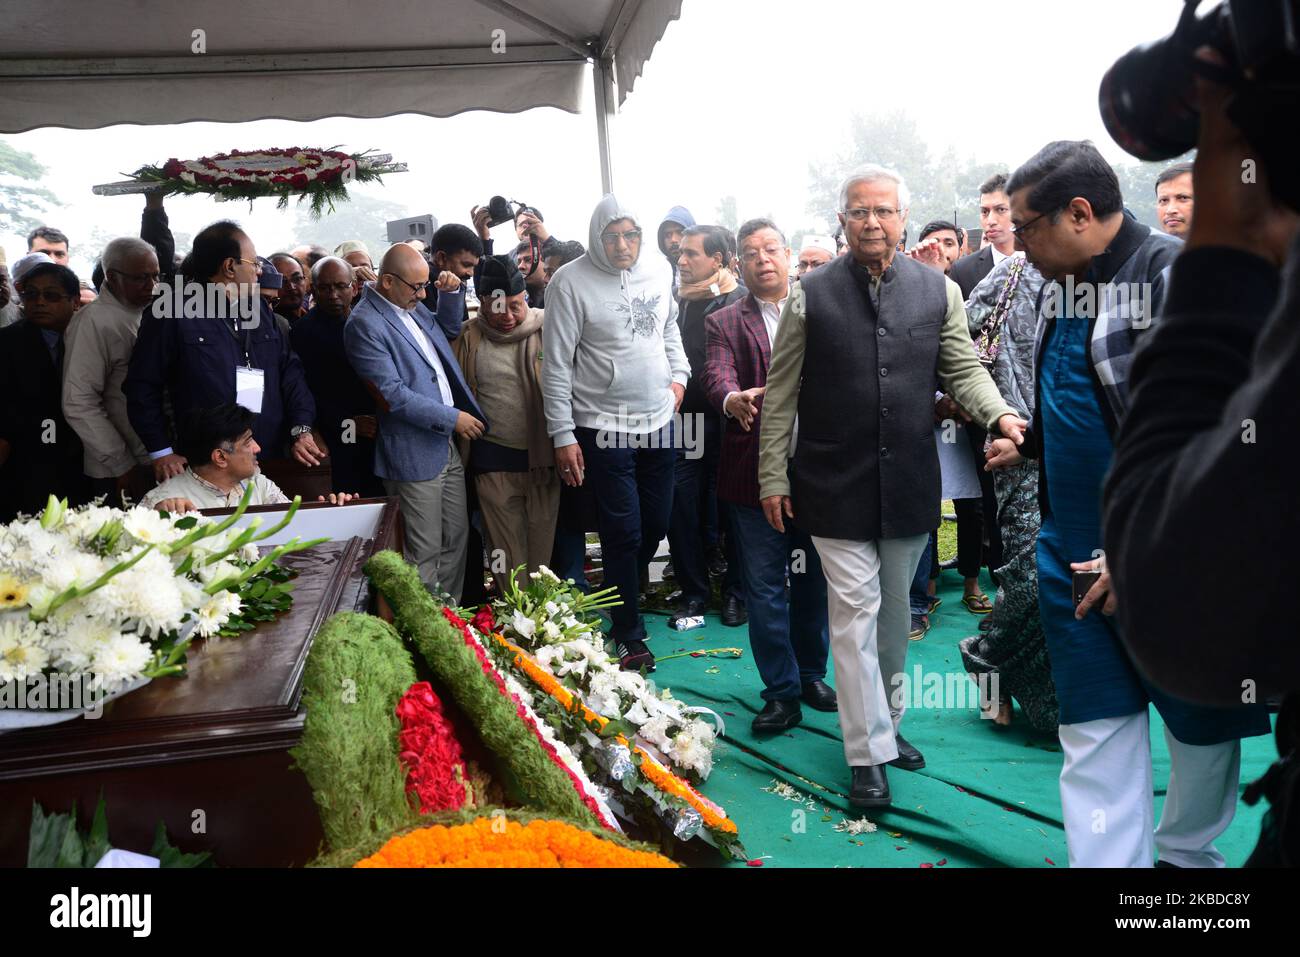 People pay their respects to the late Sir Fazle Hasan Abed, the founder of the Bangladesh Rural Advancement Committee (BRAC), in Dhaka, Bangladesh, on December 22, 2019. Thousands gathered in Bangladesh's capital on December 22 to attend the funeral of Sir Fazle Hasan Abed, founder of BRAC, one of the world's largest NGOs, to show their final respect. (Photo by Mamunur Rashid/NurPhoto) Stock Photo